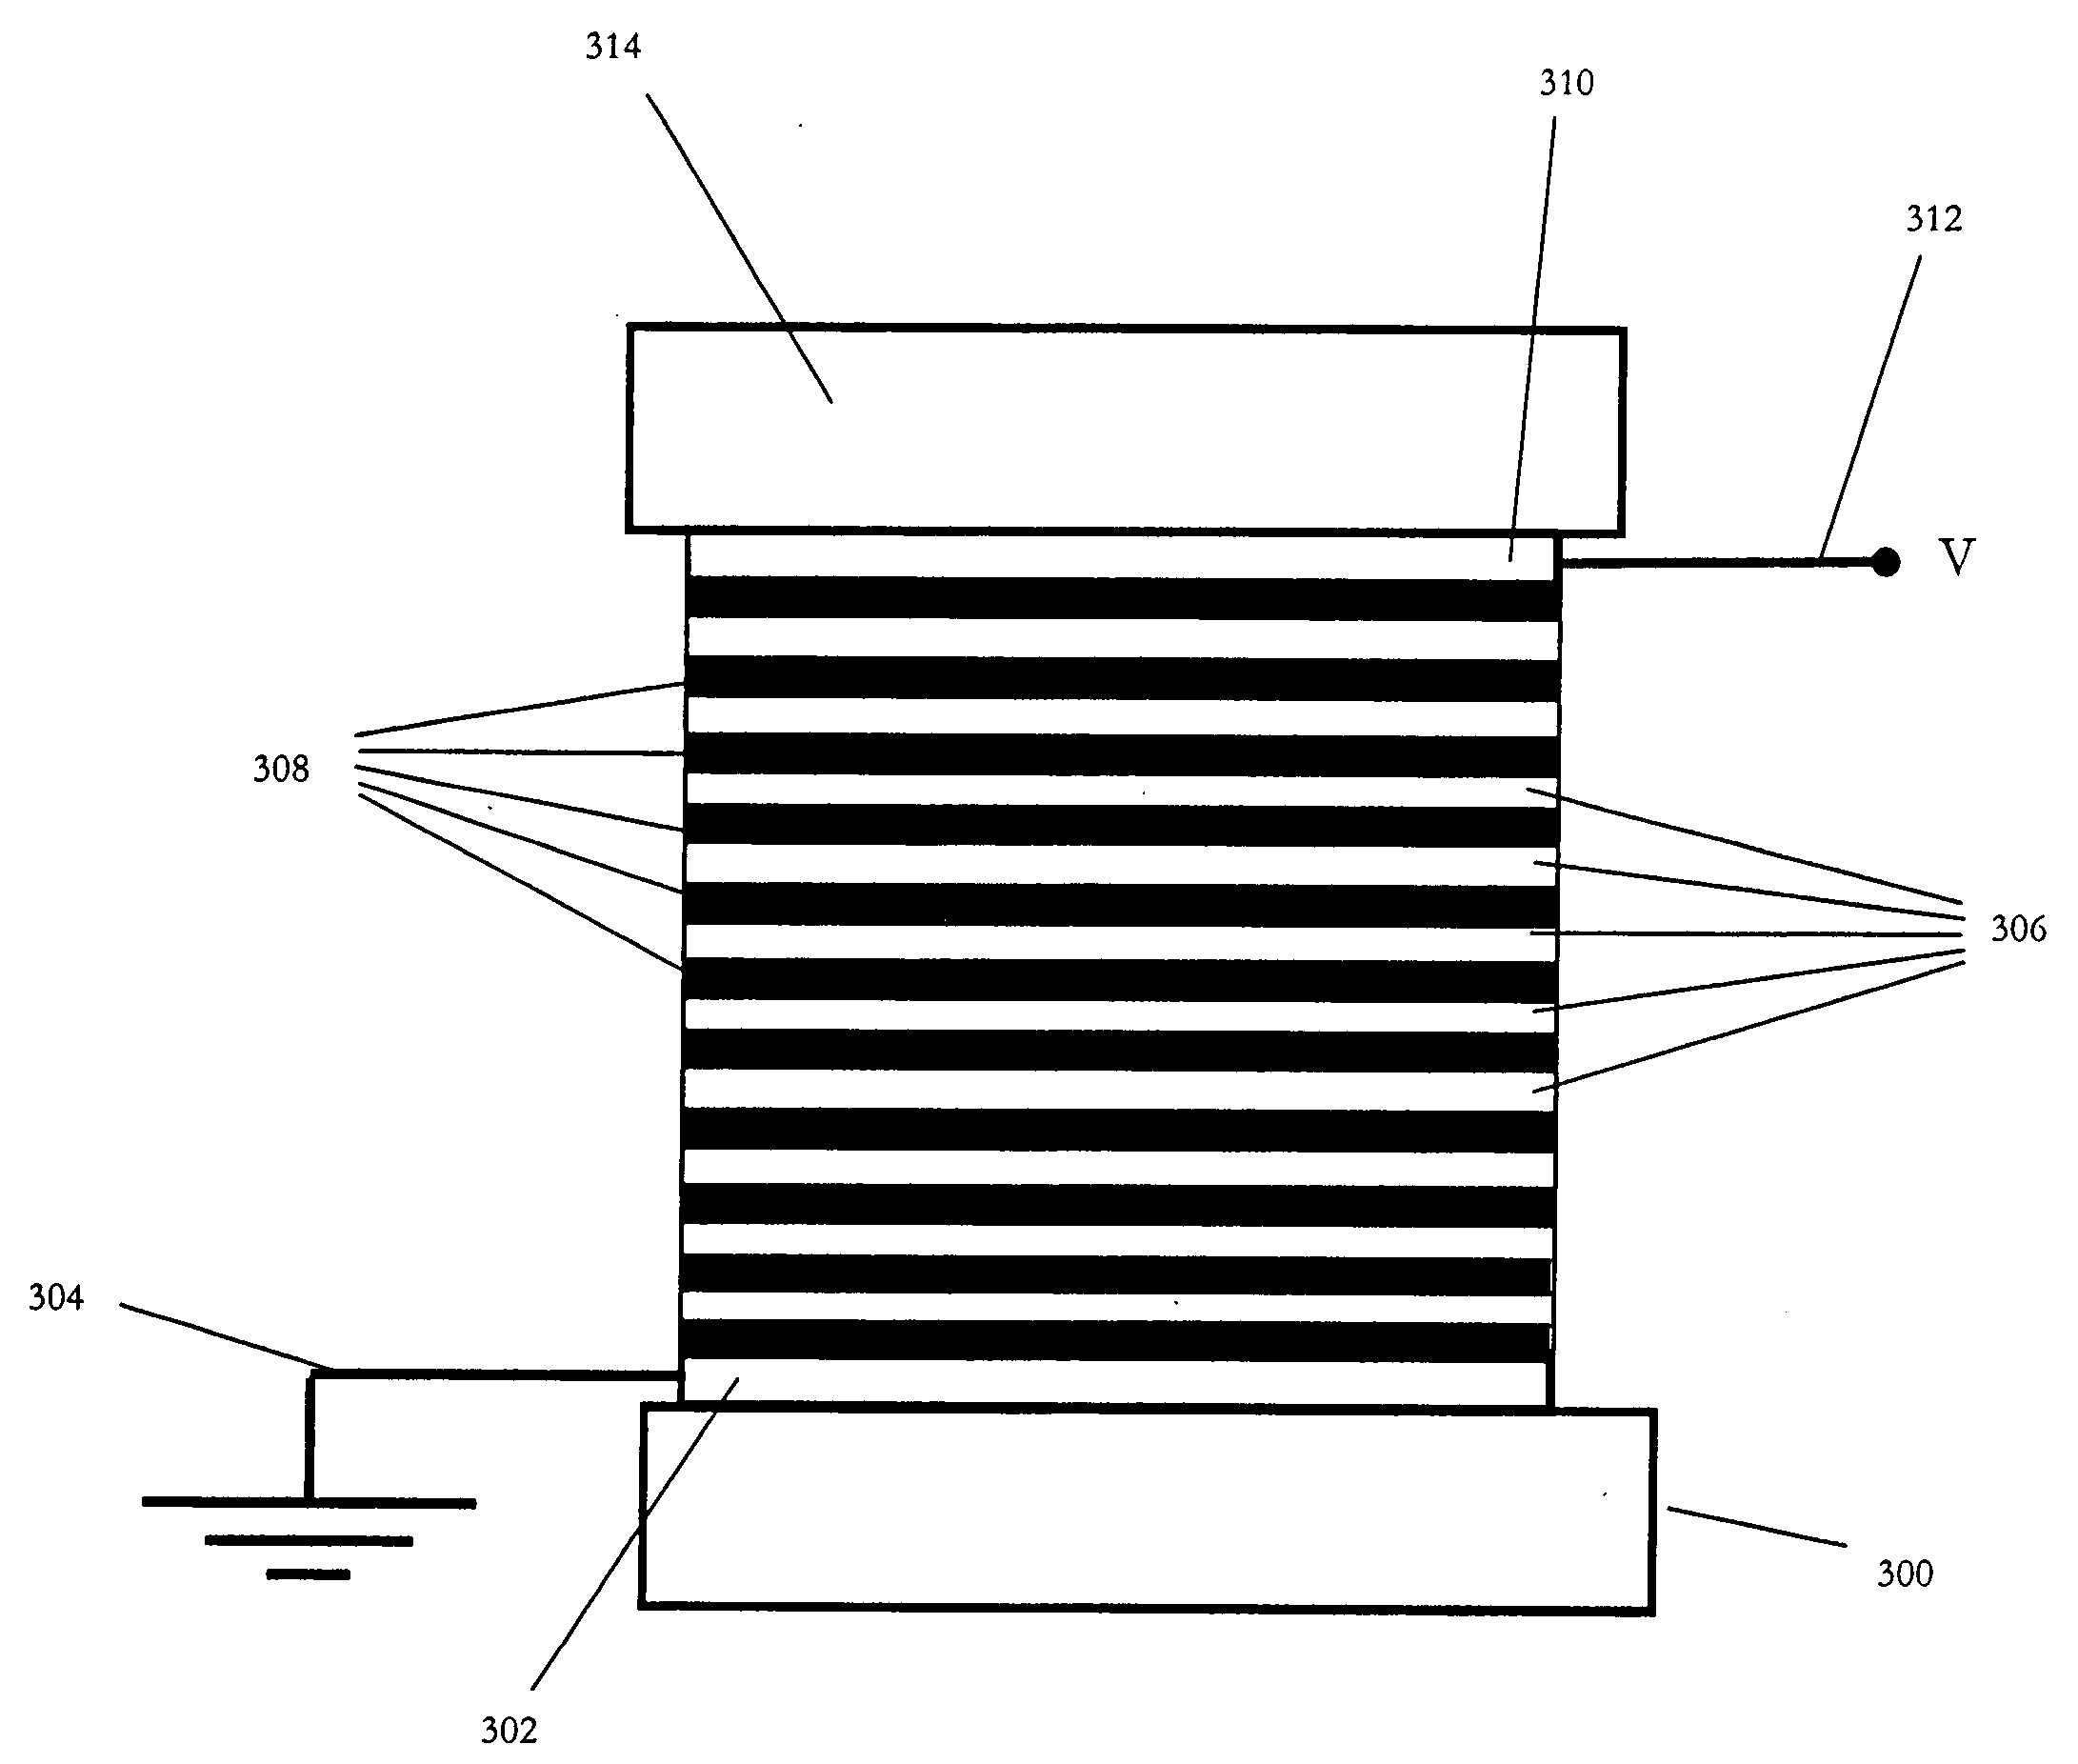 Cascaded light emitting devices based on mixed conductor electroluminescence